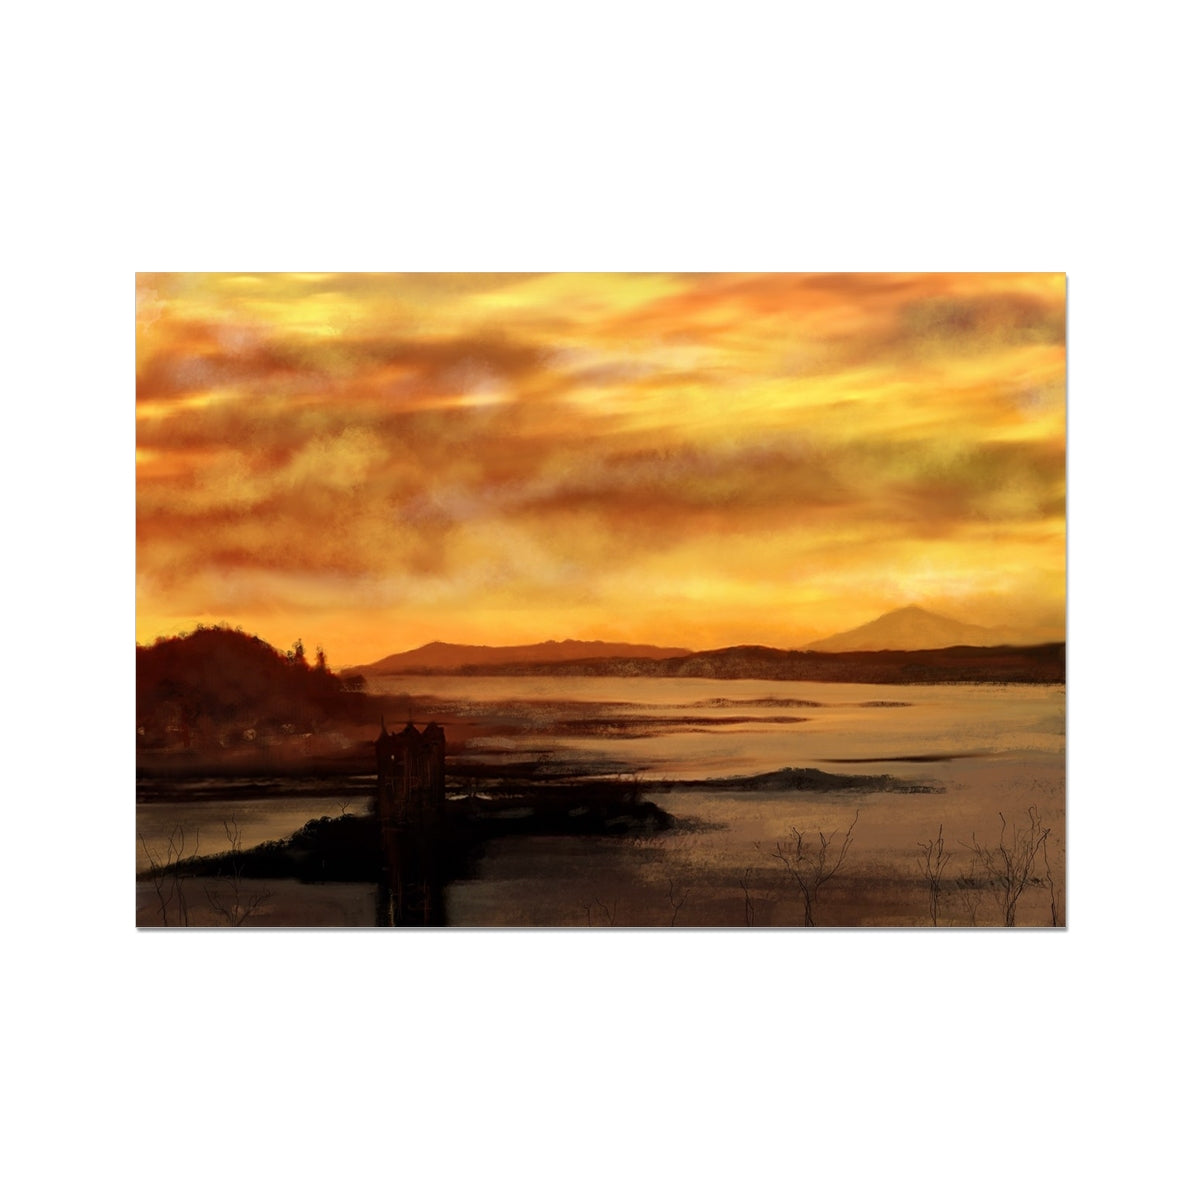 Castle Stalker Dusk Painting | Fine Art Prints From Scotland-Unframed Prints-Historic & Iconic Scotland Art Gallery-A2 Landscape-Paintings, Prints, Homeware, Art Gifts From Scotland By Scottish Artist Kevin Hunter